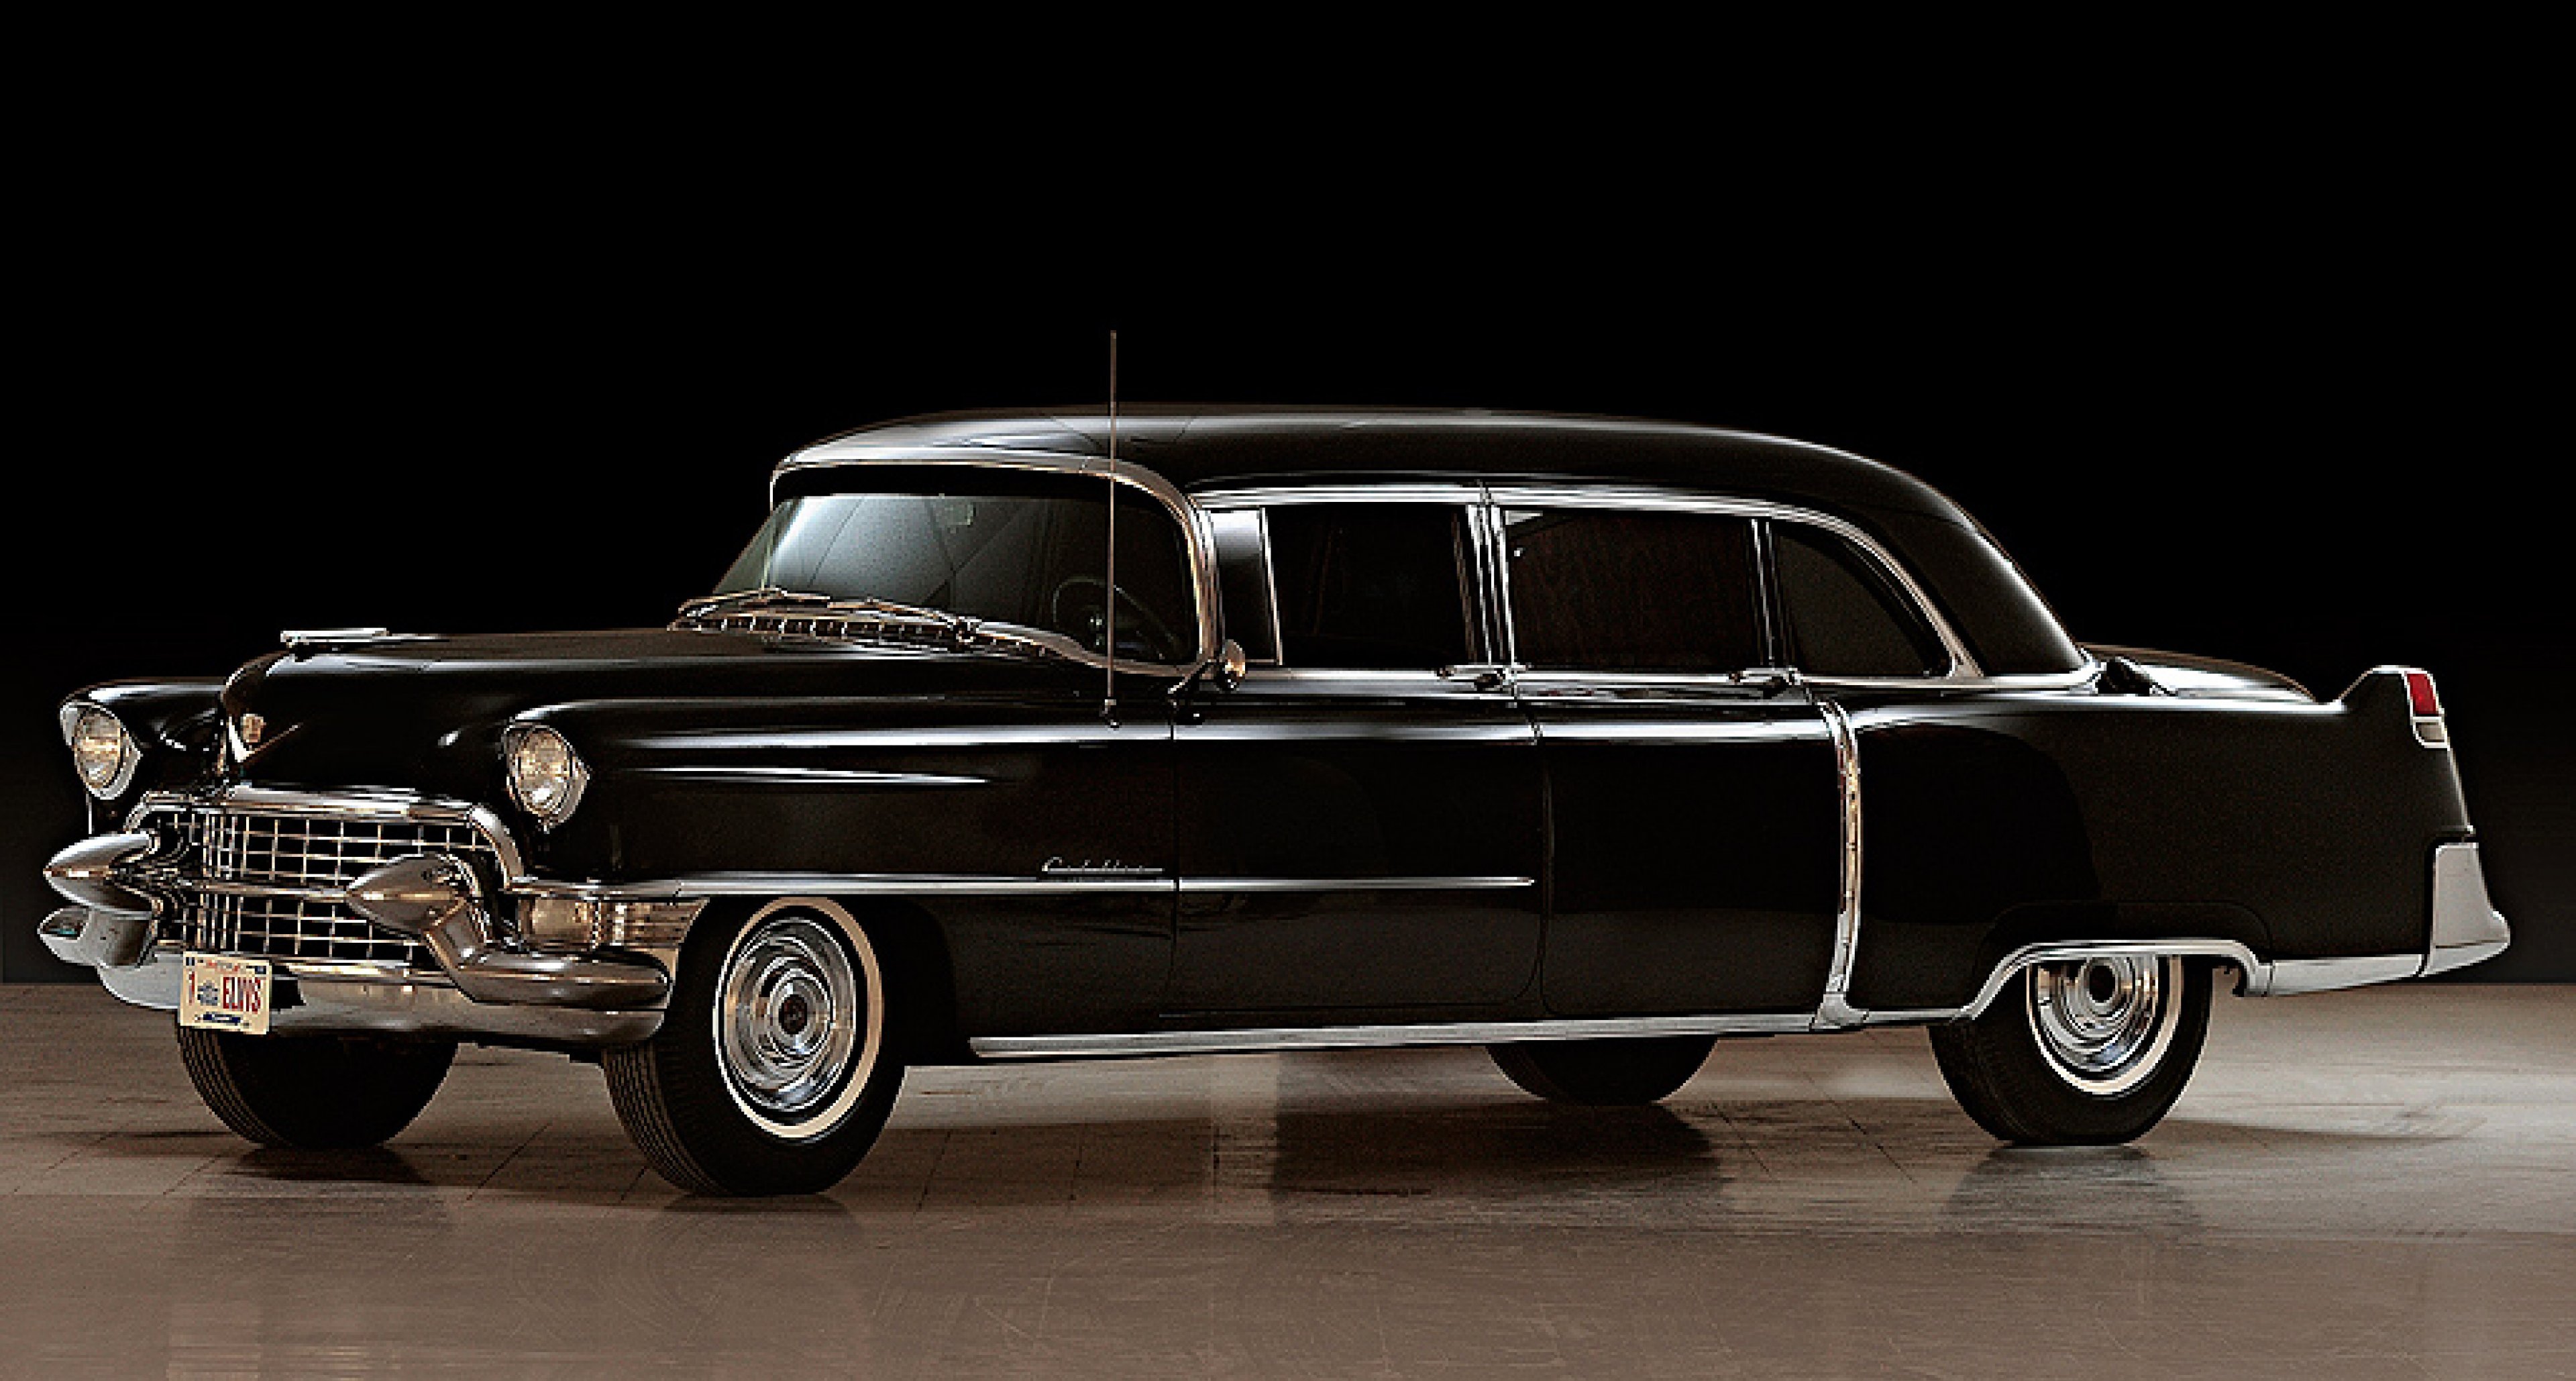 Elvis Presley's Cadillac Fleetwood 75 Limousine to be auctioned